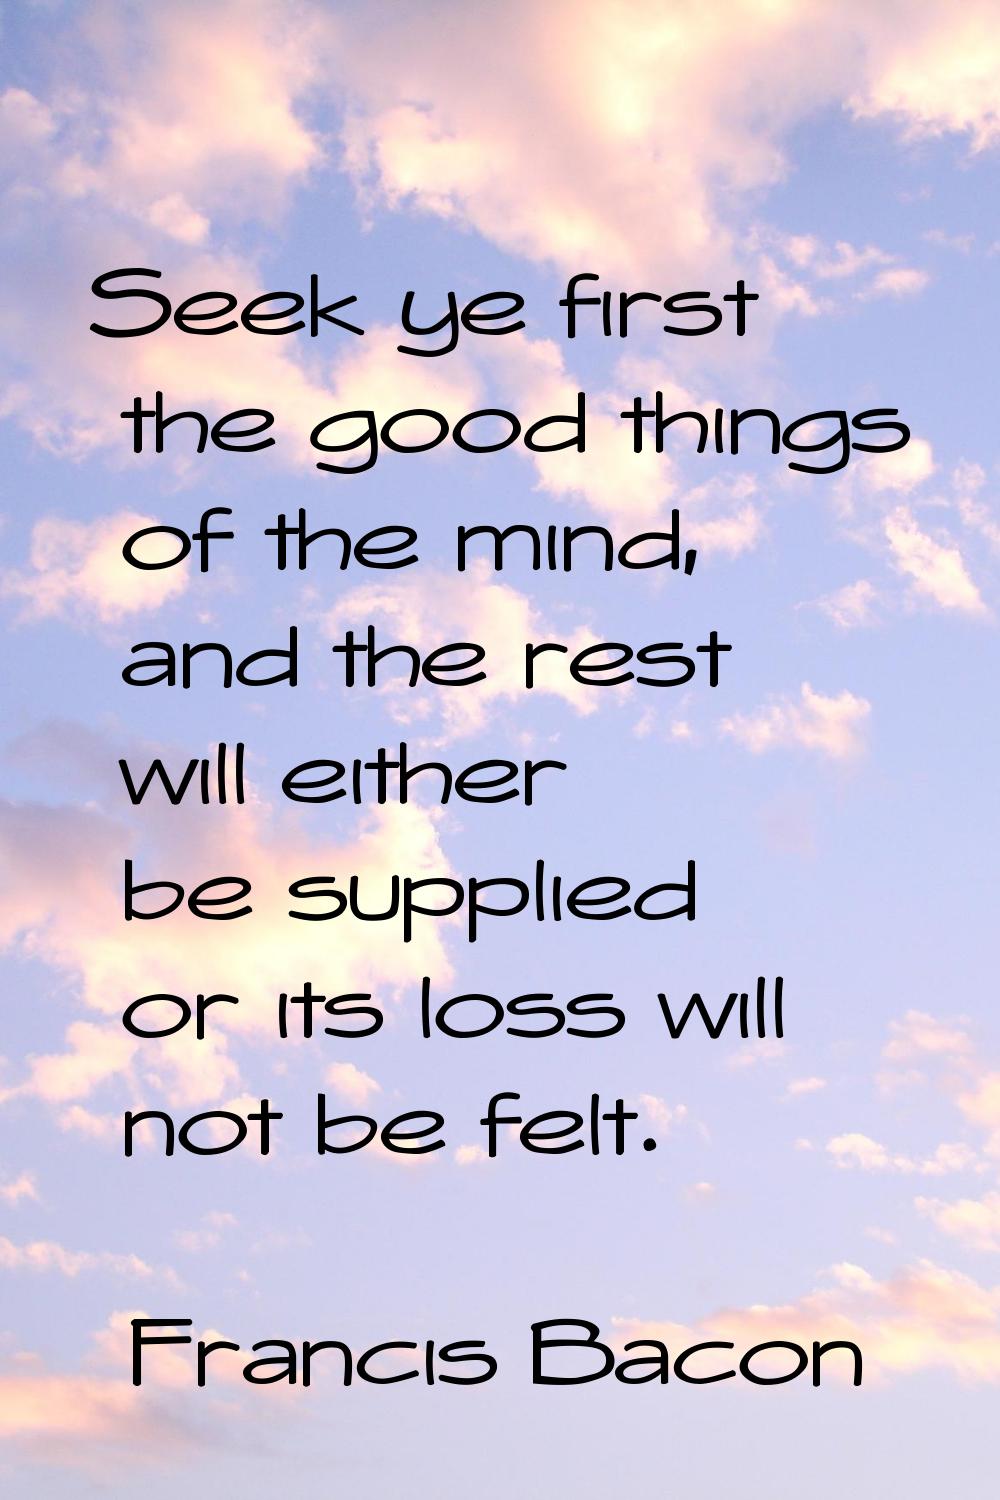 Seek ye first the good things of the mind, and the rest will either be supplied or its loss will no